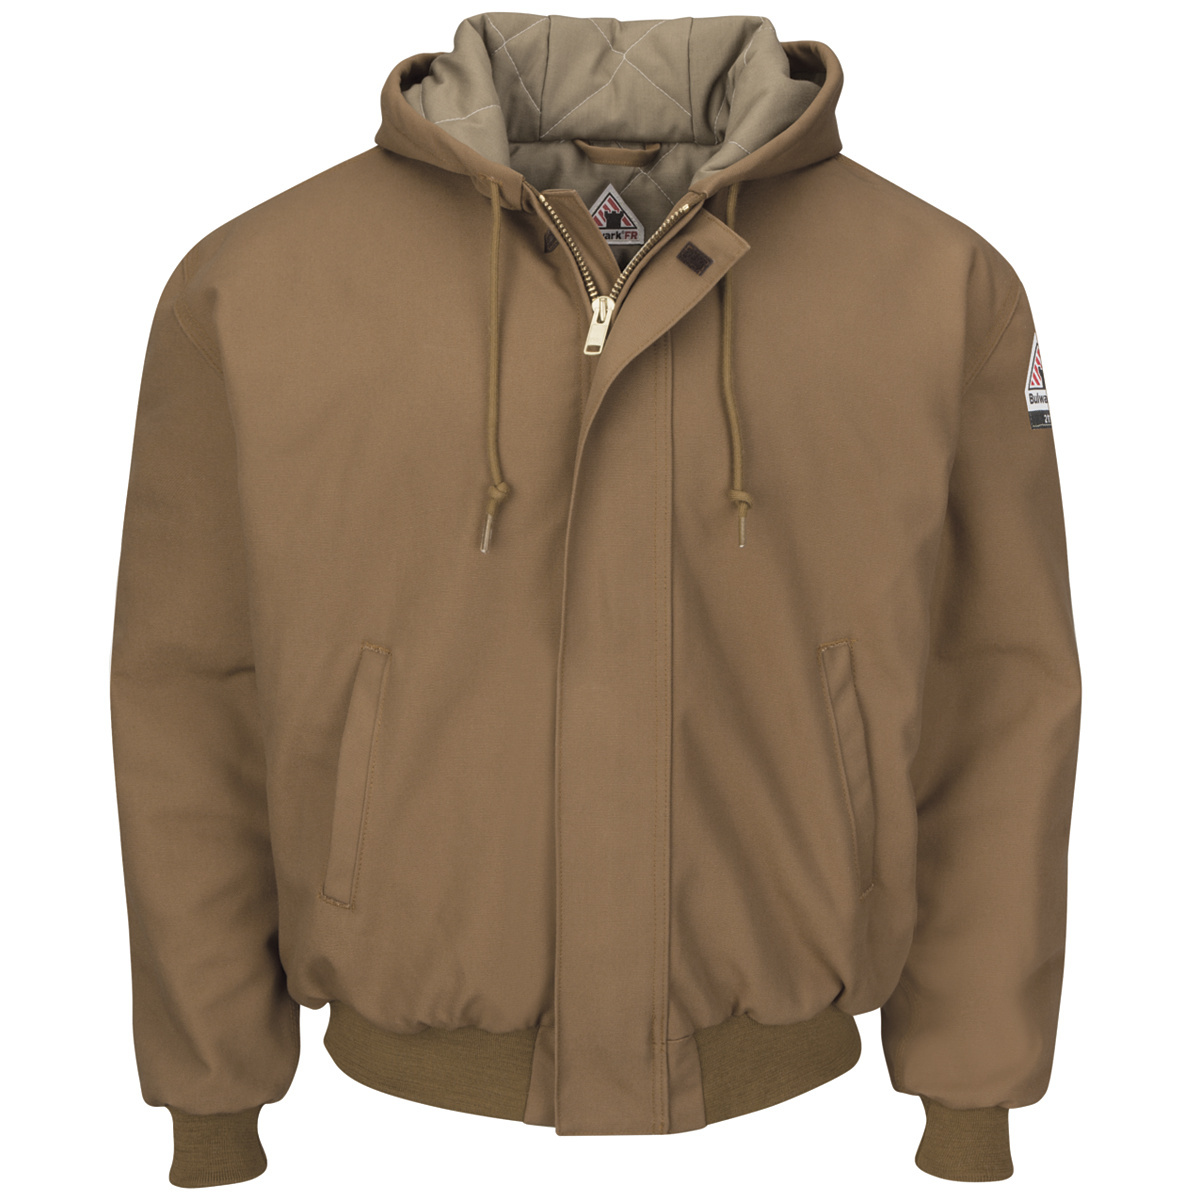 Bulwark® X-Large Tall Brown Cotton Duck Flame Resistant Jacket With Quilted Lining And Zipper Front Closure